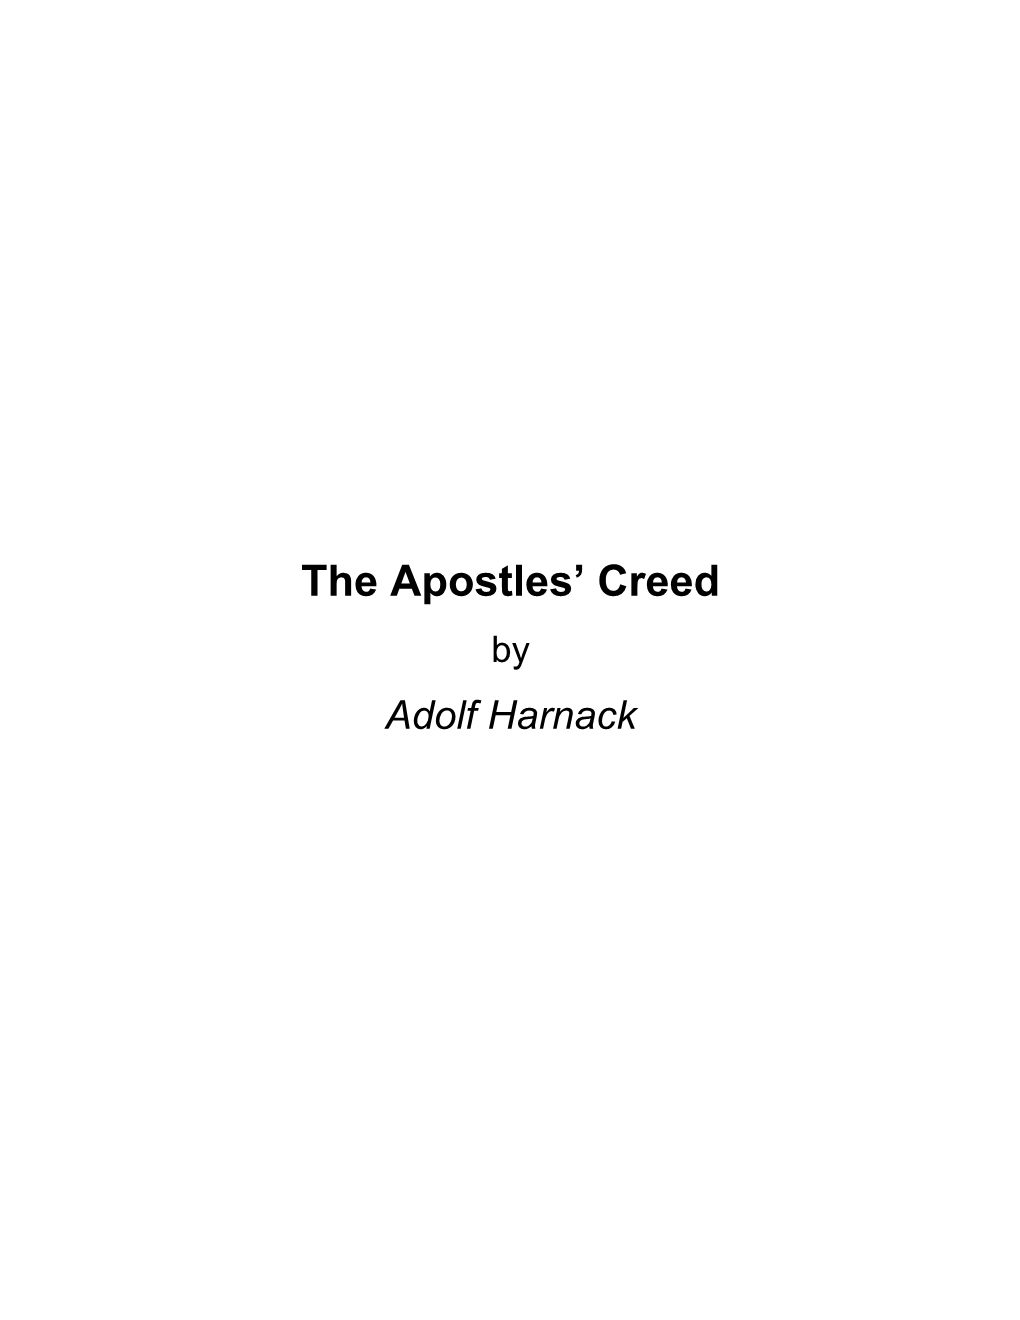 The Apostles' Creed by Adolf Harnack About the Apostles' Creed by Adolf Harnack